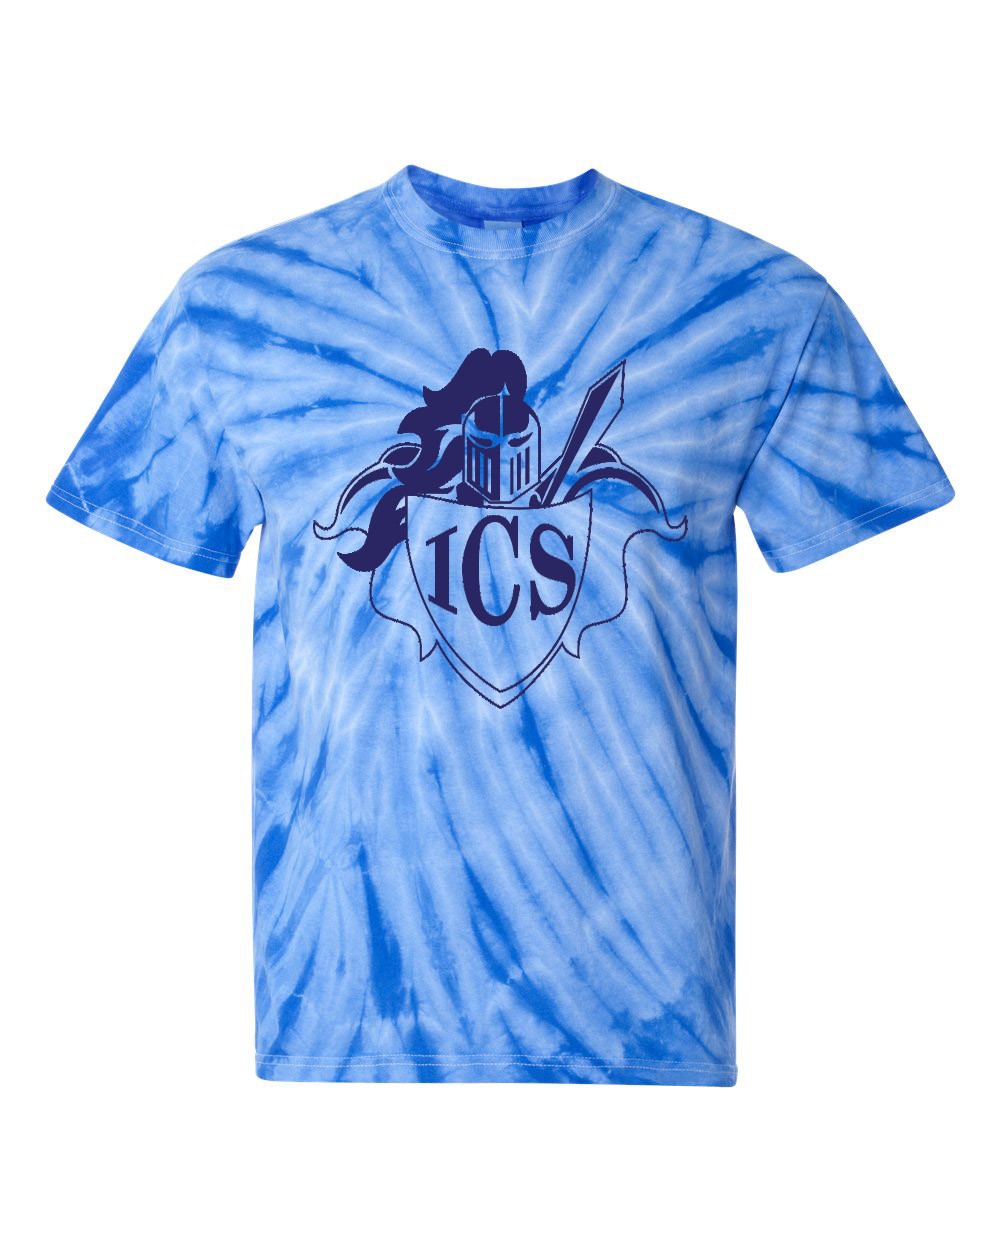 ICS Staff S/S Tie Dye T-Shirt w/ Navy Logo #F7-F8- Please Allow 2-3 Weeks for Delivery